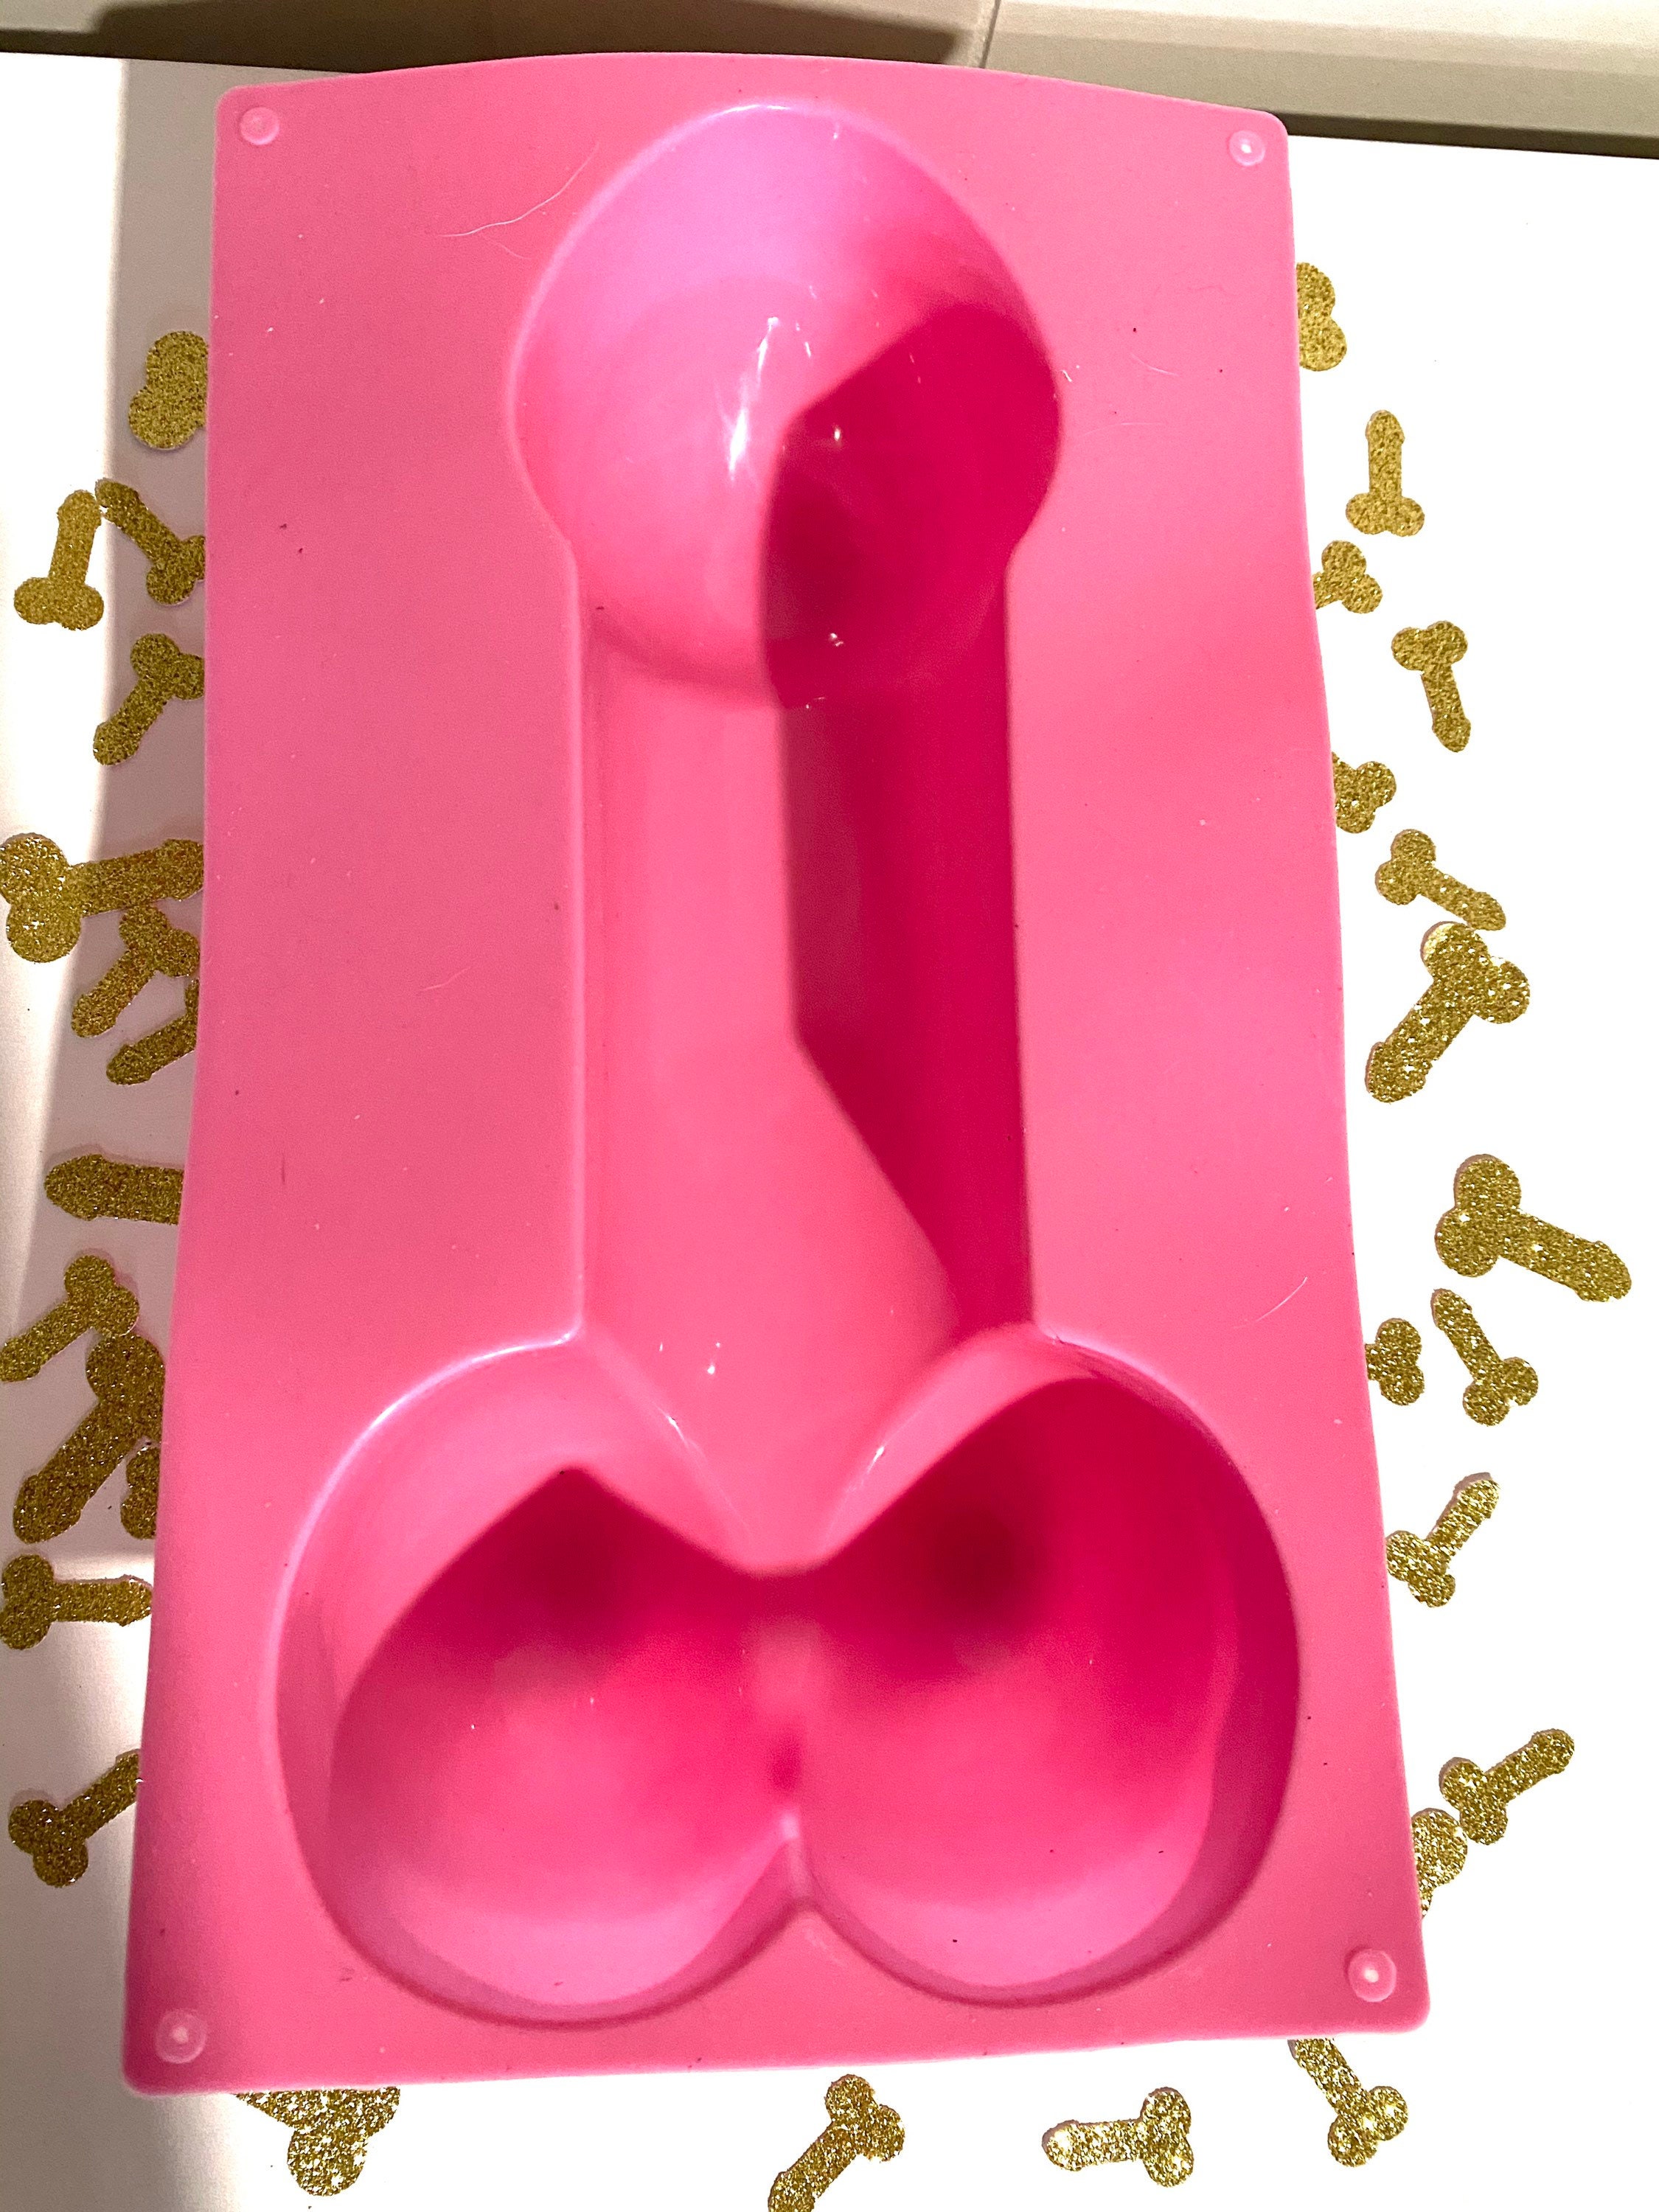 Penis Cake Mold, Penis Chocolate Mold, Dick Ice Mold, Dick Chocolate Mold,  Bachelorette Party Favors, Hen Party Favors, Ice Mold